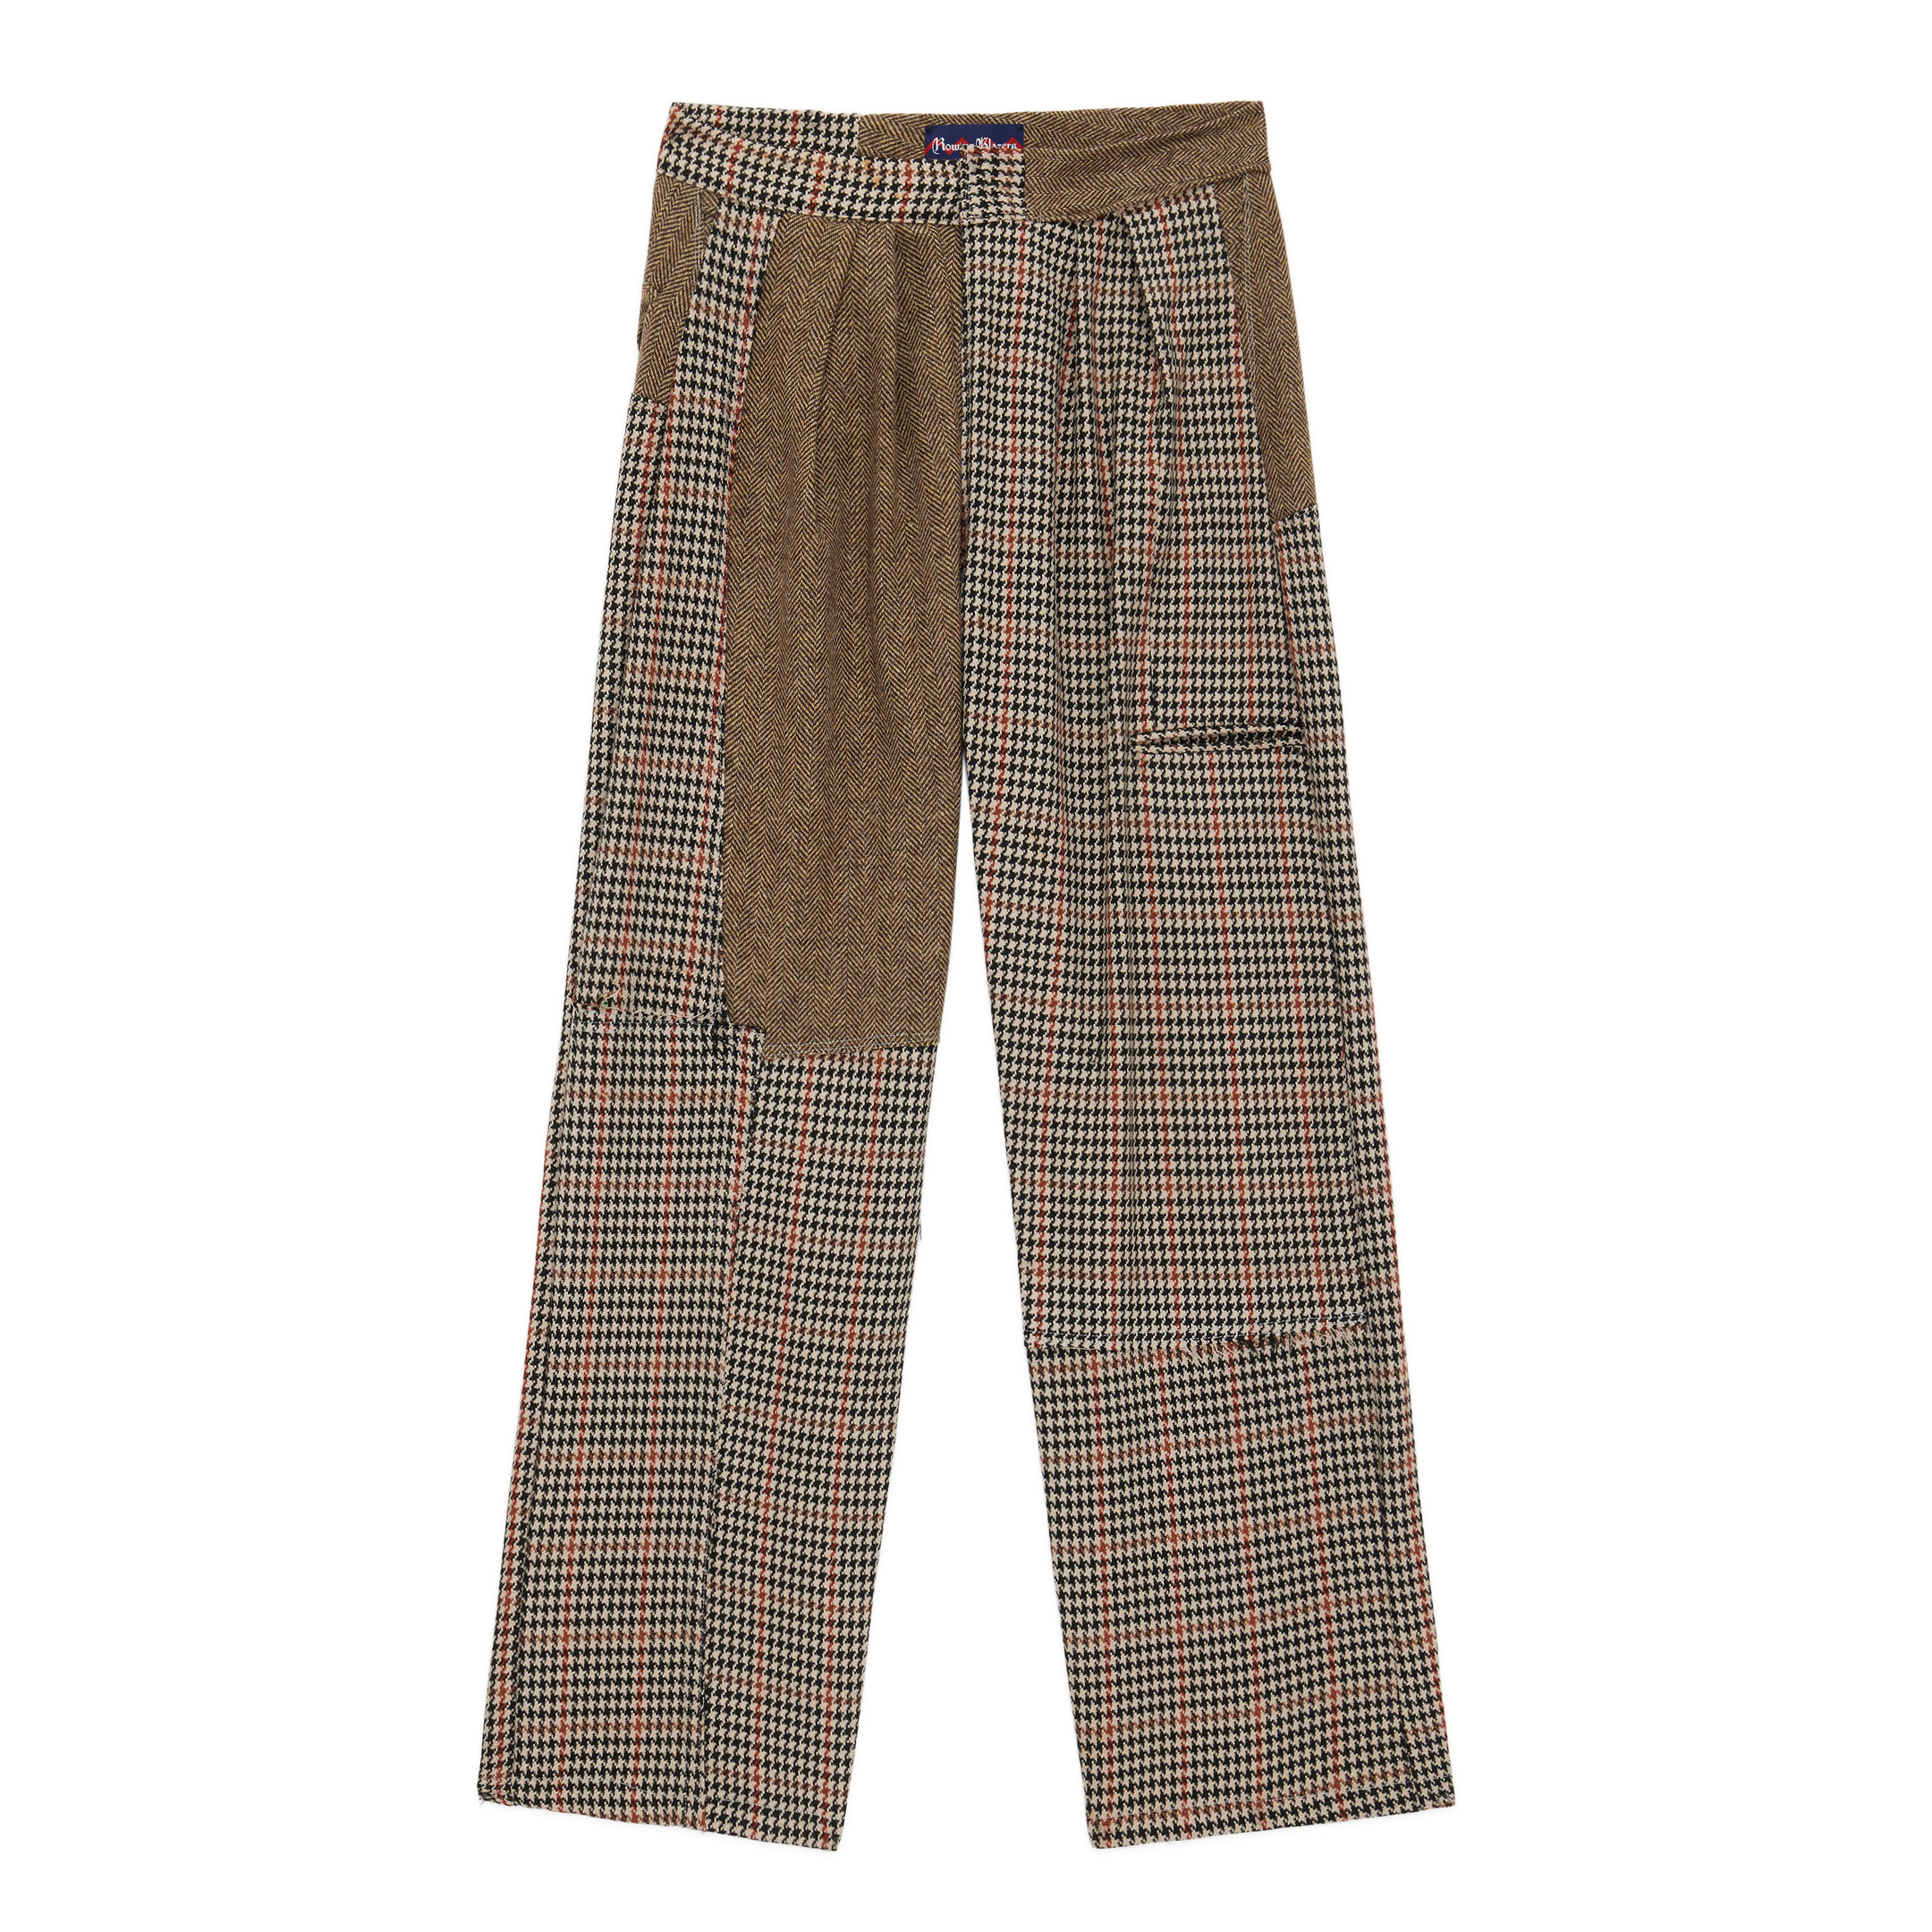 Mixed Tweed Trousers